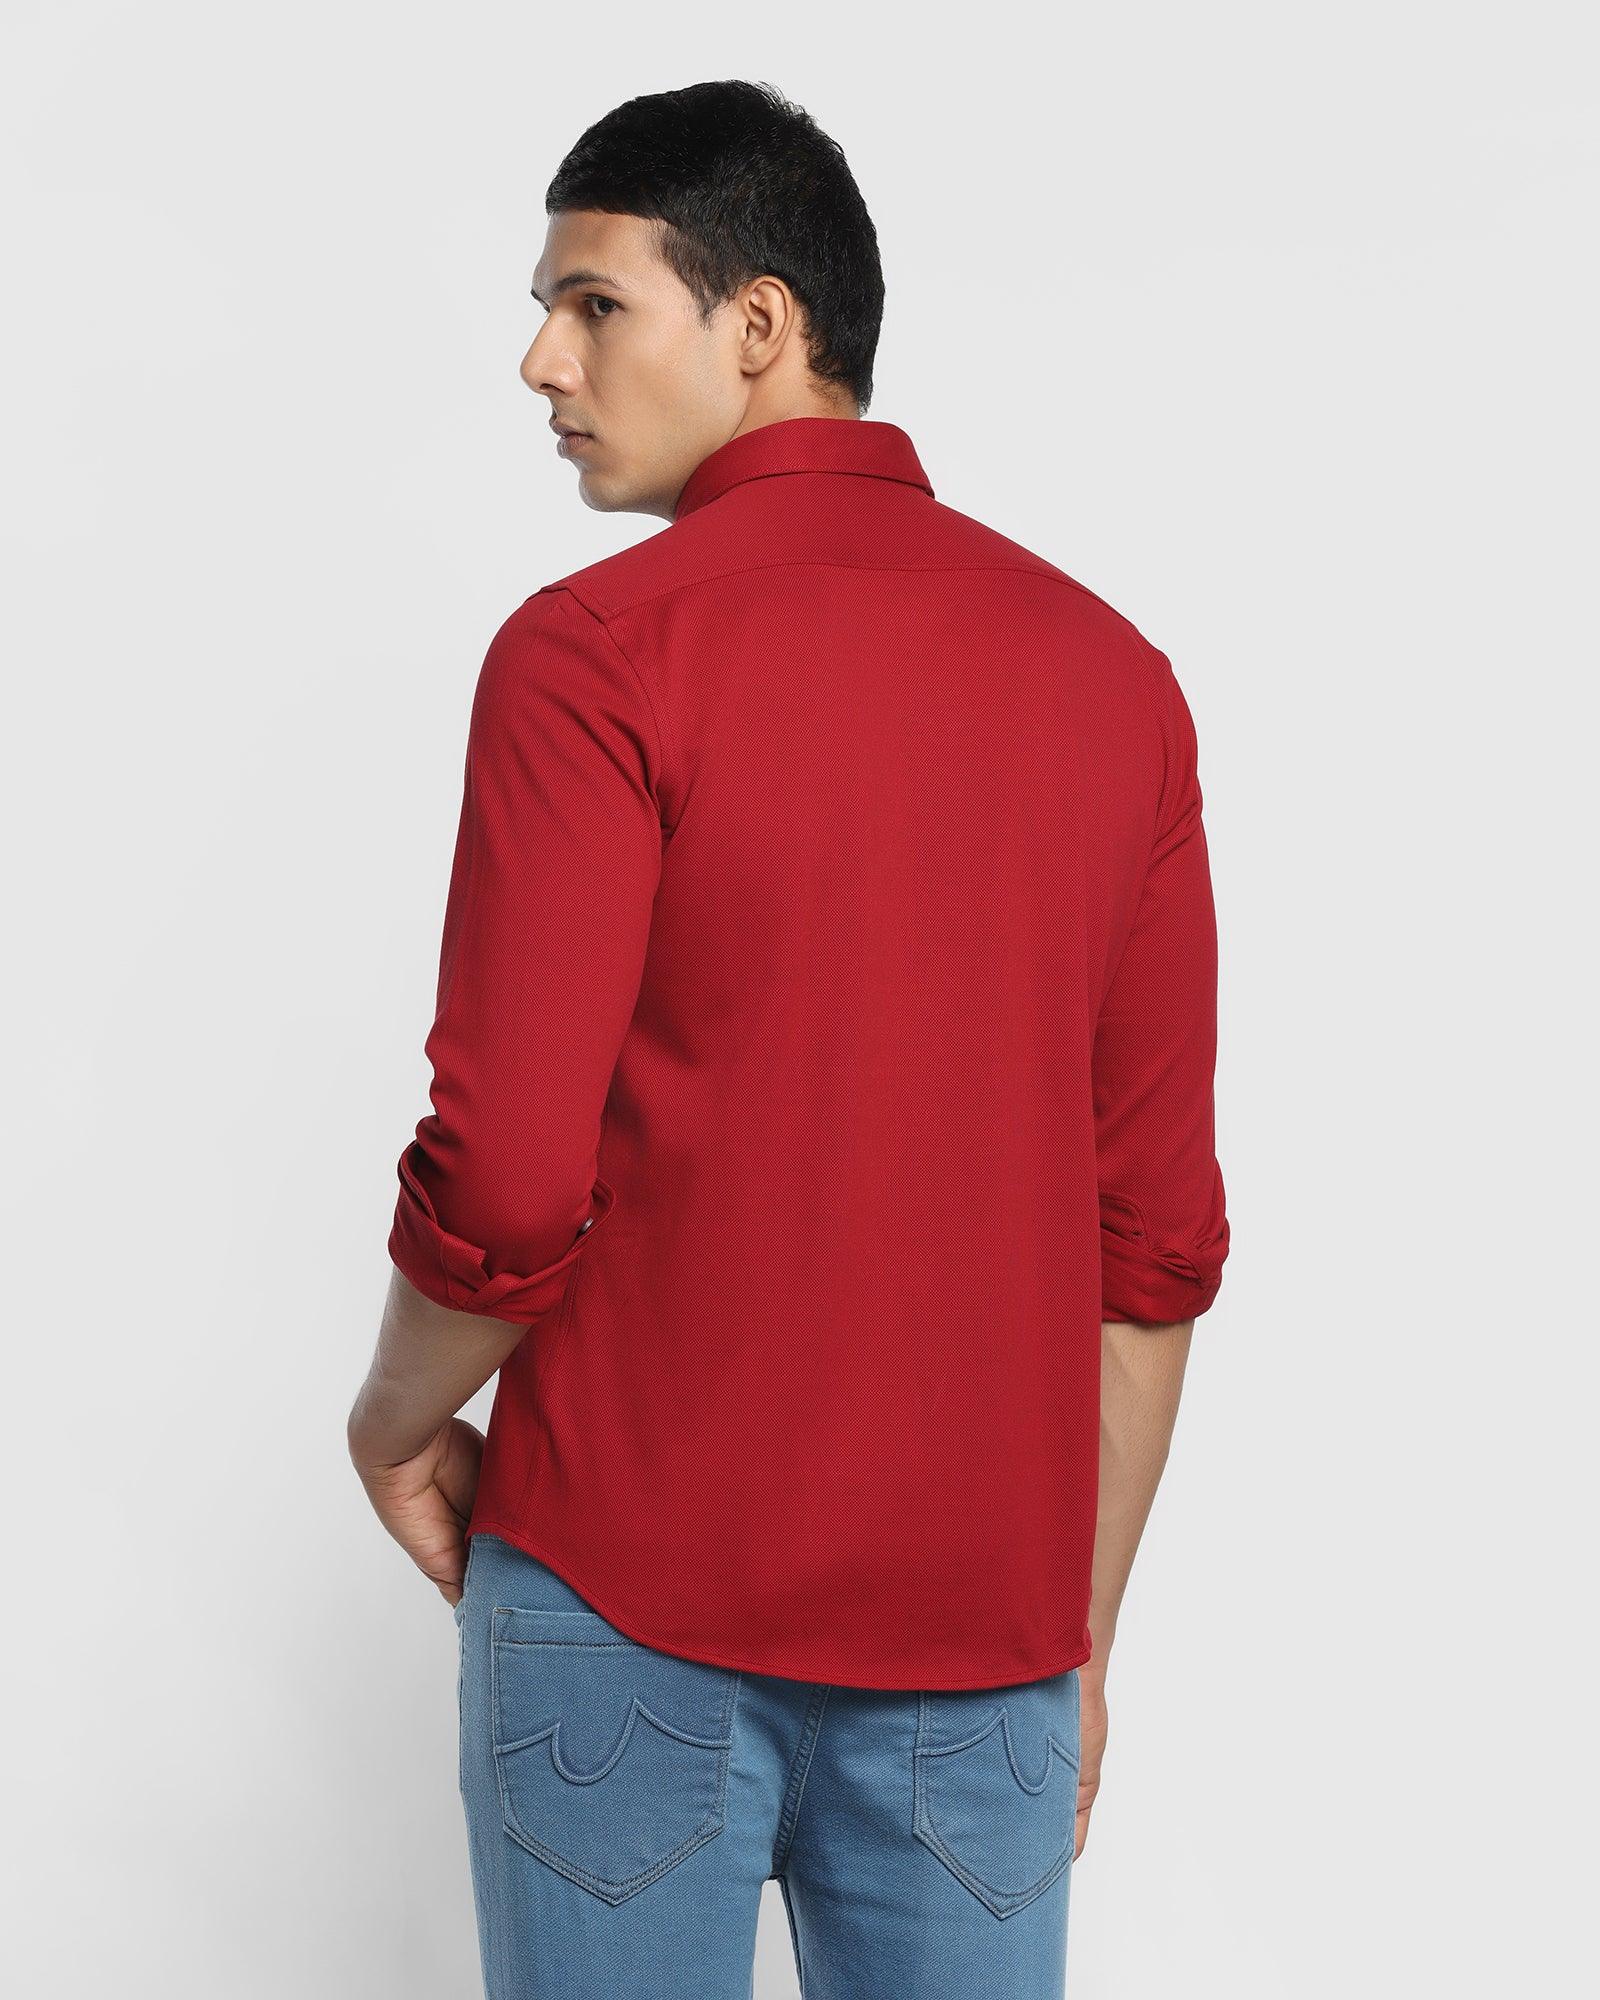 Casual Red Solid Shirt - Pareto